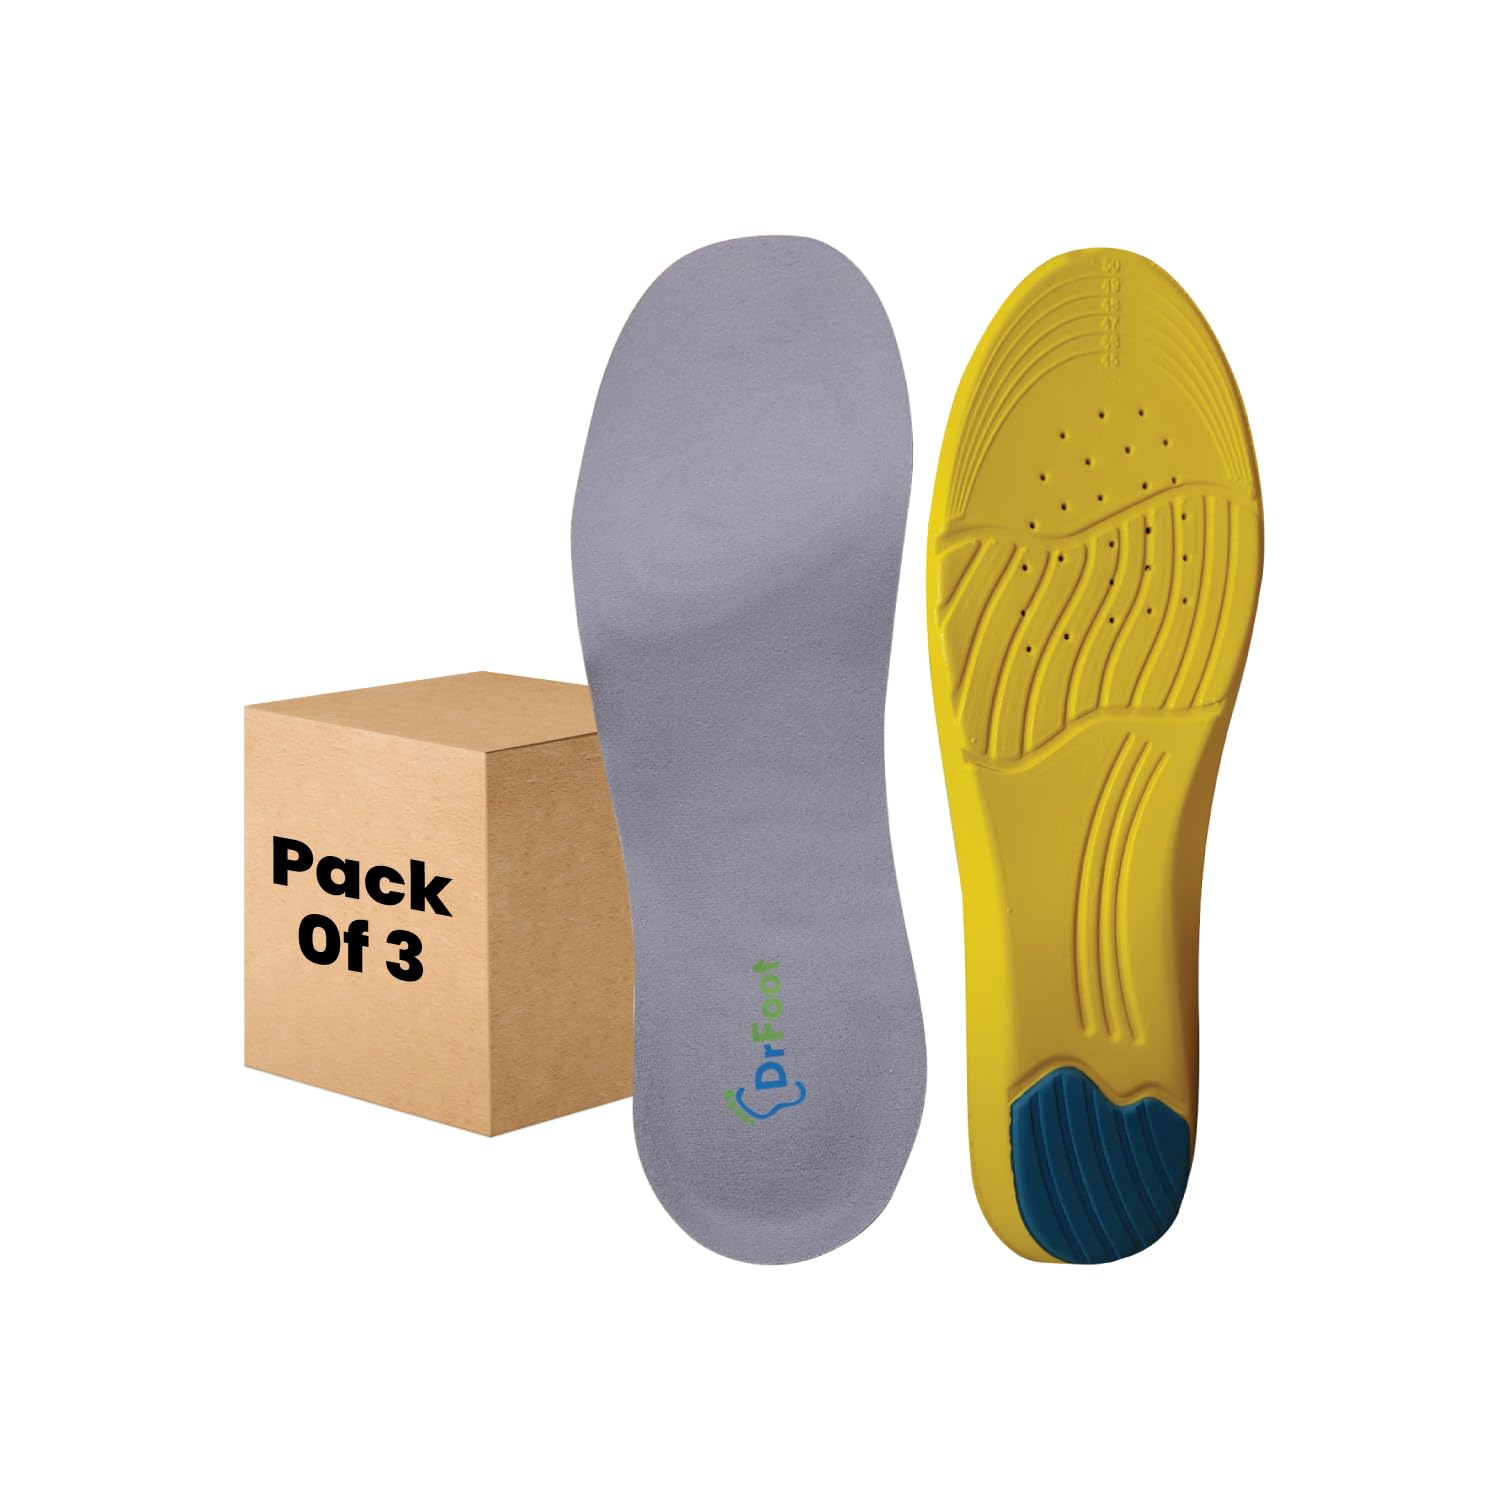 Dr Foot Gel Insoles Pair | For Walking, Running, Sports Shoes | All Day Comfort Shoe Inserts With Dual Gel Technology | Ideal Full-Length Sole For Every Shoe For Unisex- 1 Pair (Size - S) (Pack of 3)